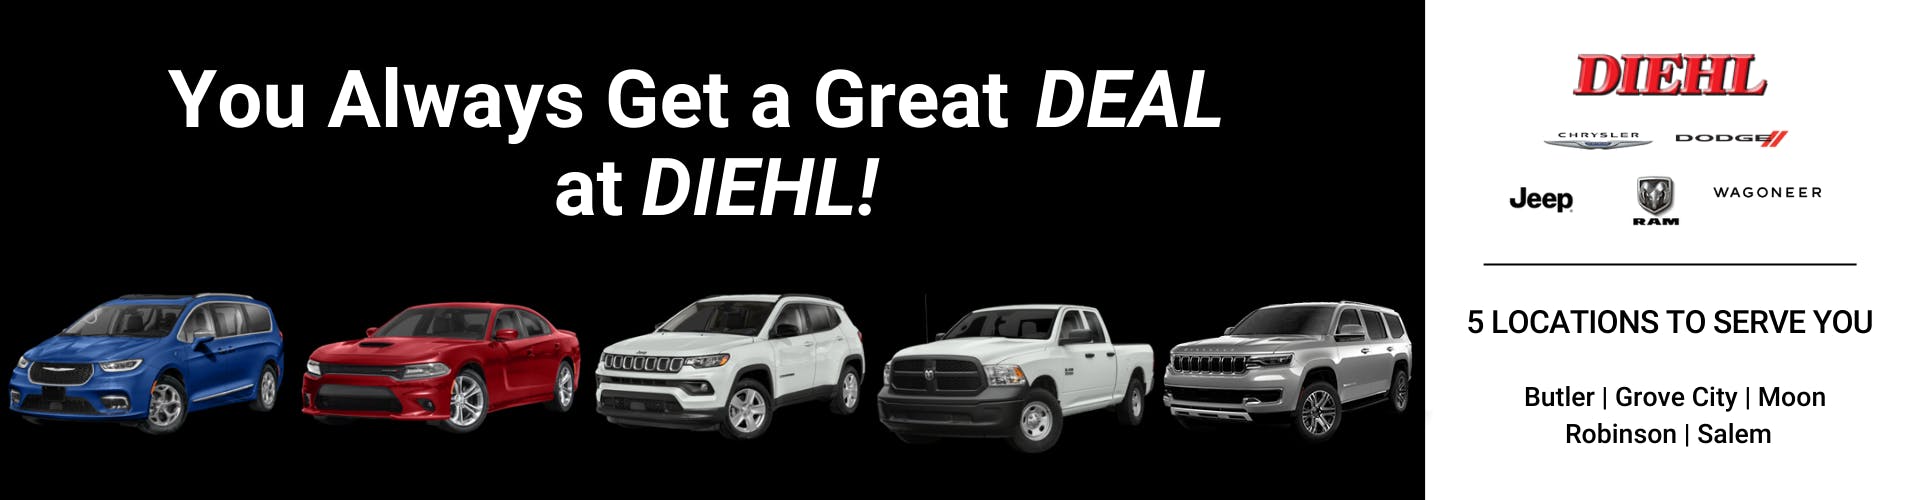 You Always Get A Great Deal at Diehl